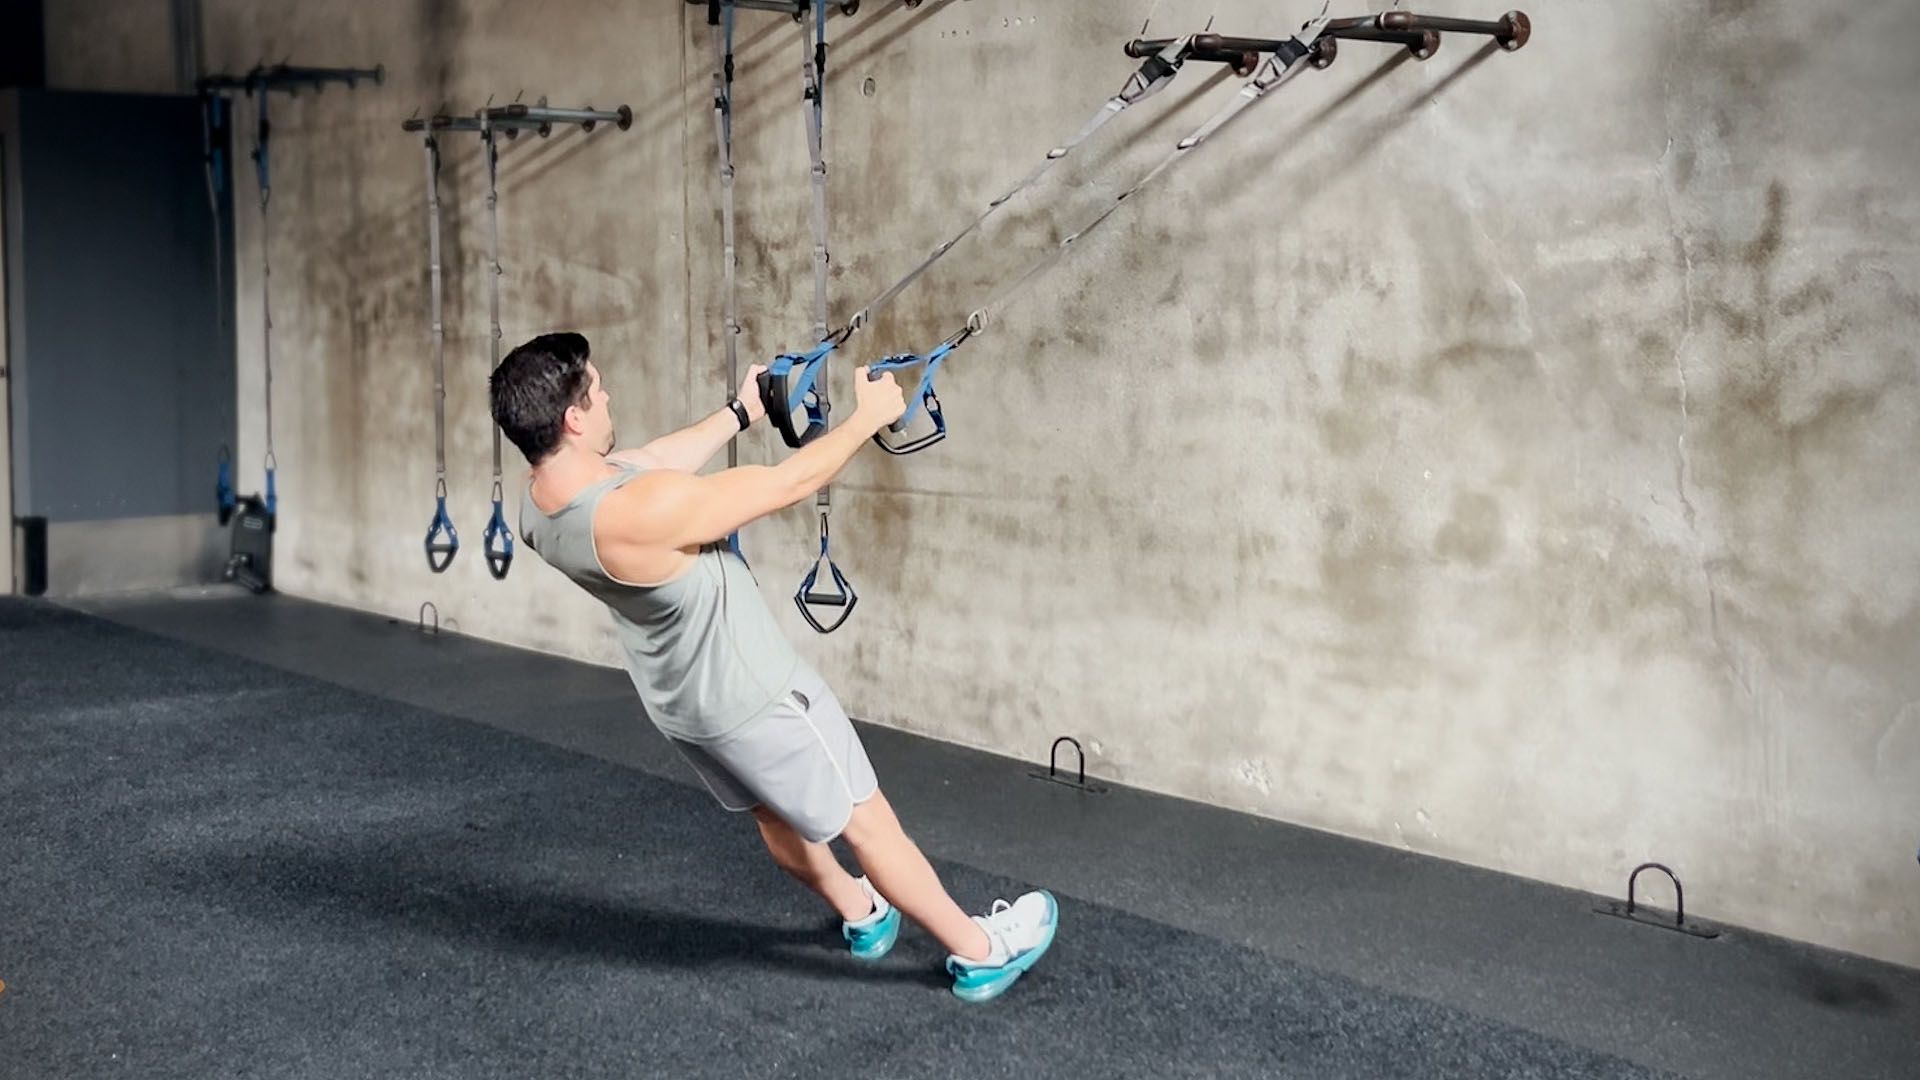 How to Do the TRX Pull-Up